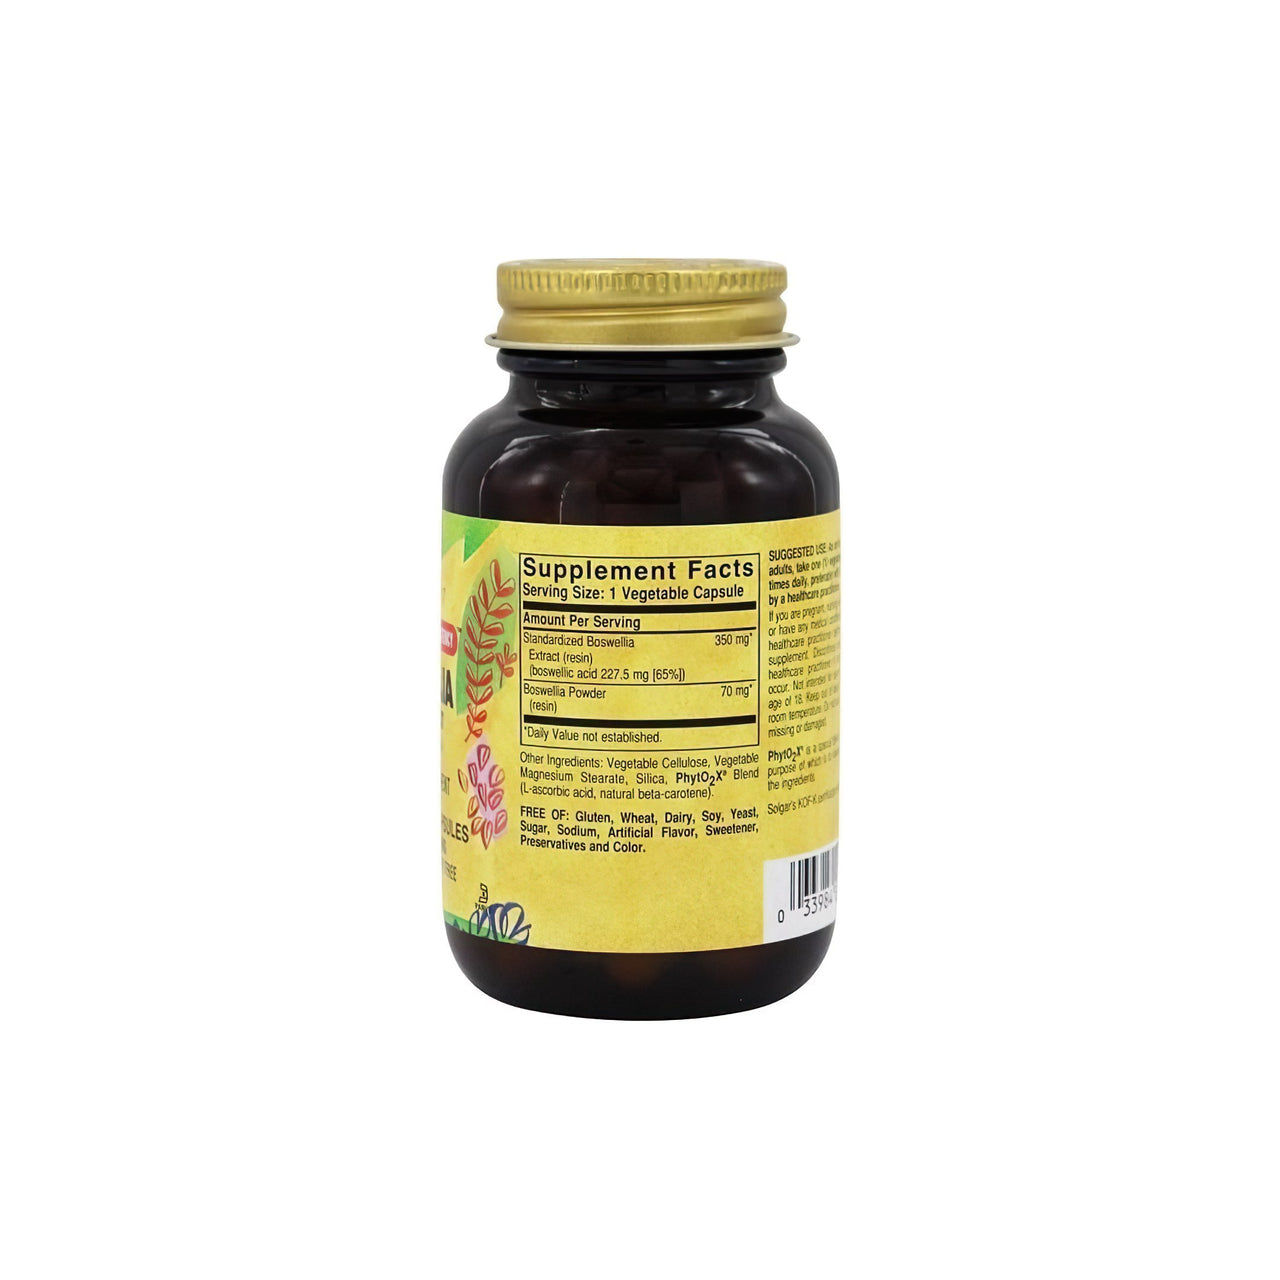 A bottle of SFP Boswellia Resin Extract 60 Vegetable Capsules by Solgar for musculoskeletal system and joint integrity.